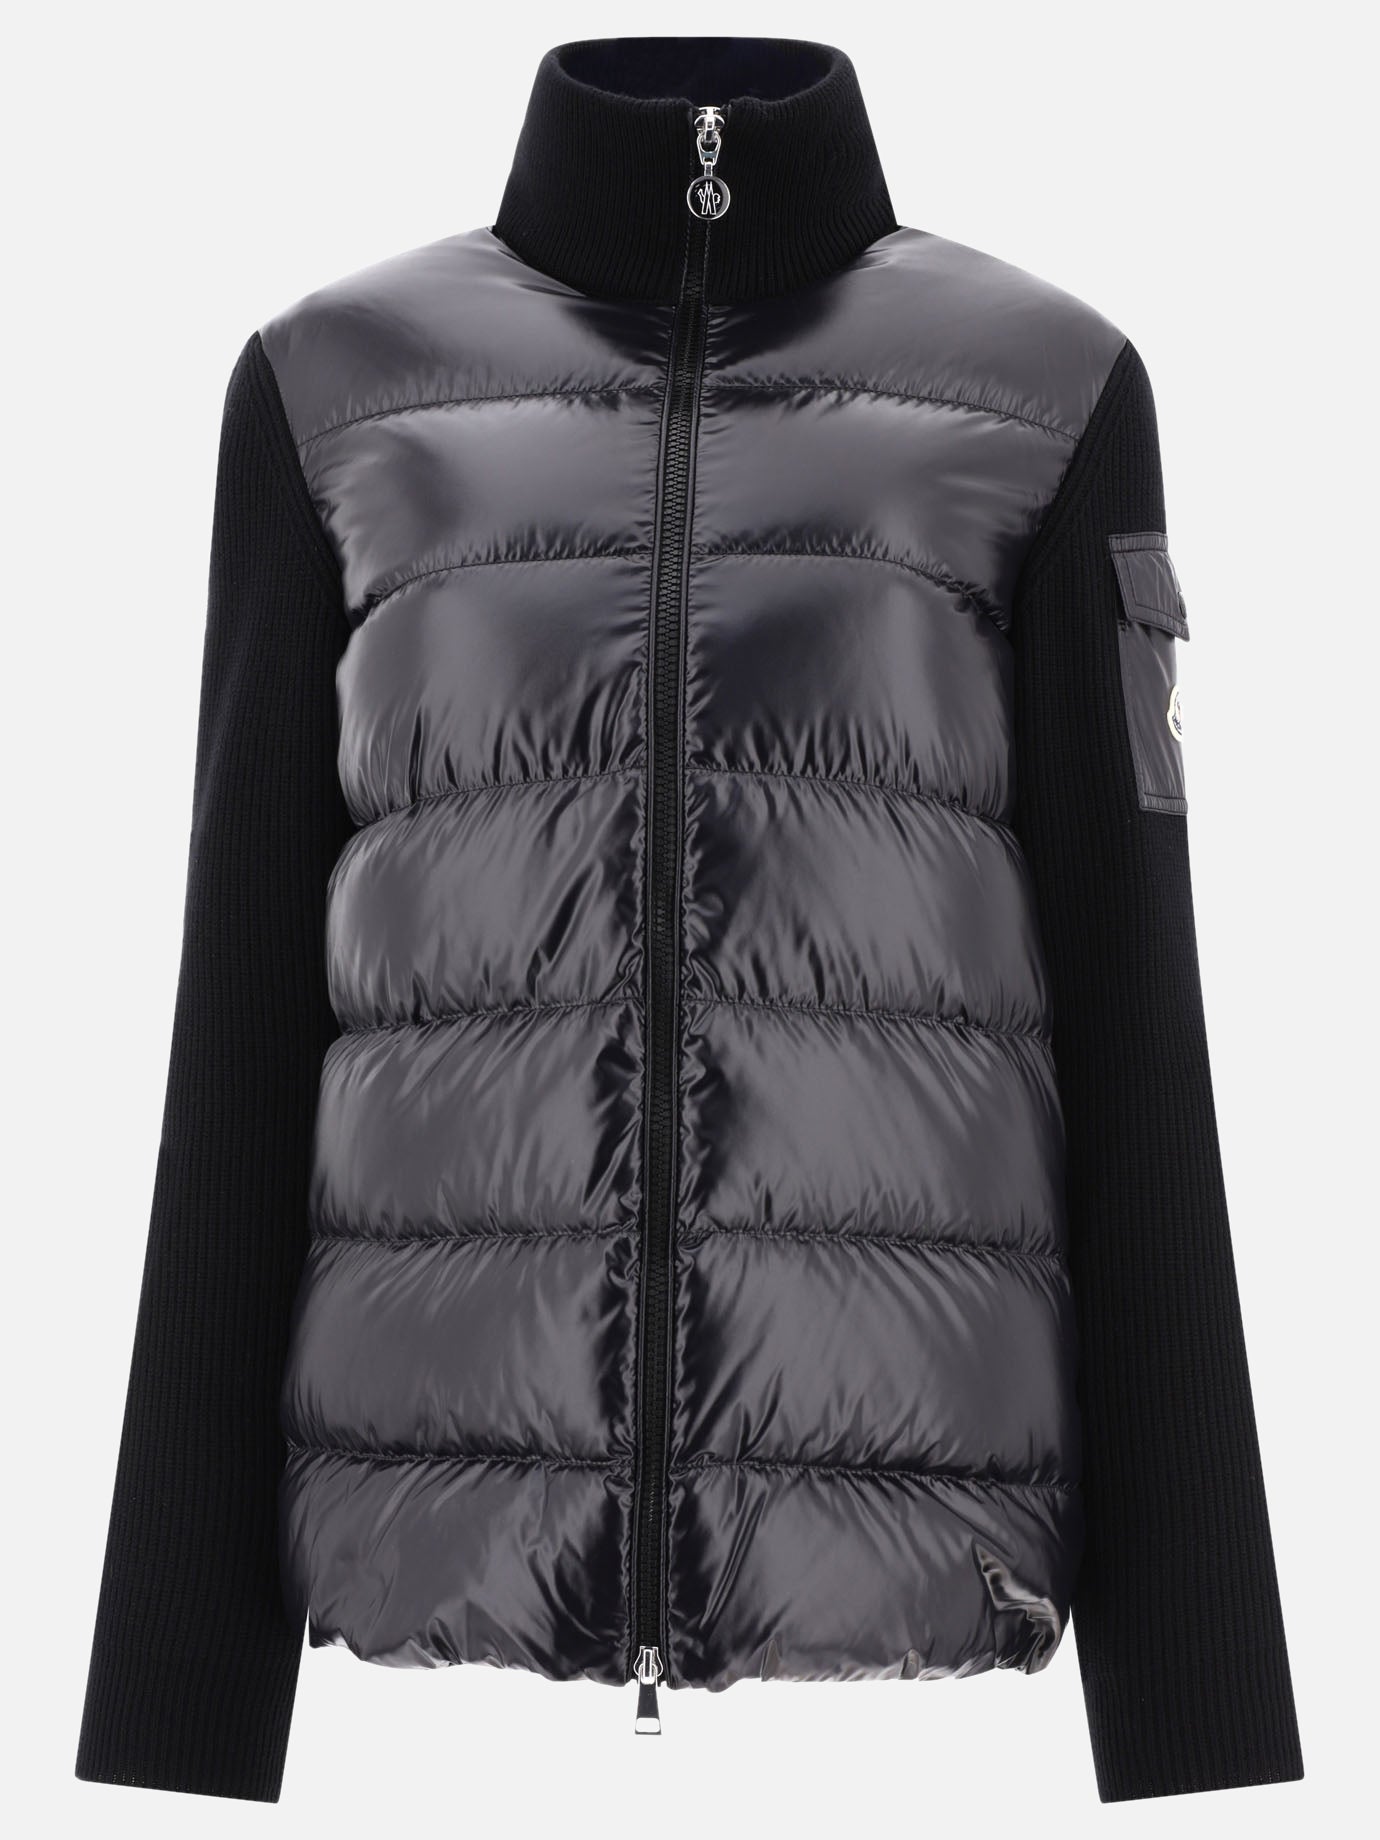 Tricot down jacket